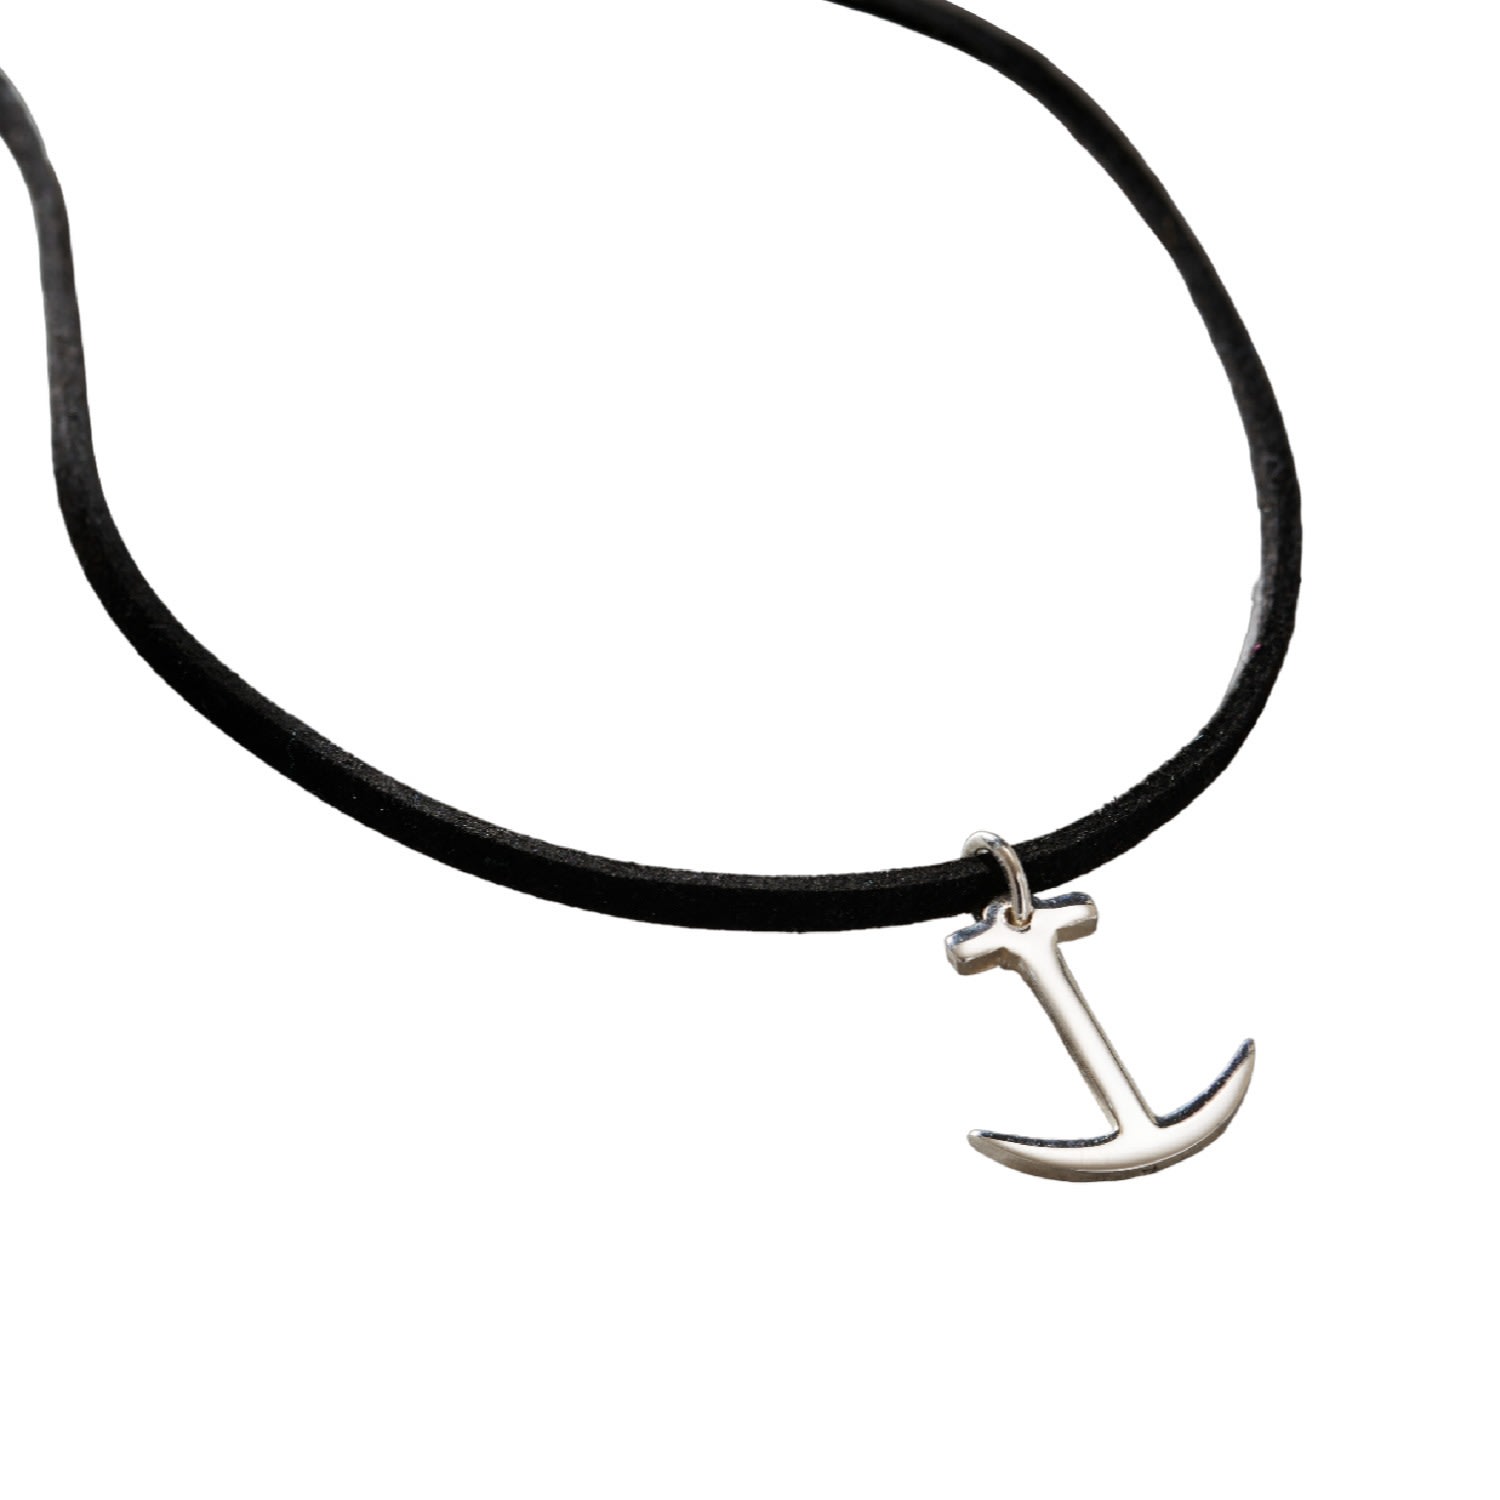 Men's Black / Silver Leather Anchor Charm Necklace Posh Totty Designs